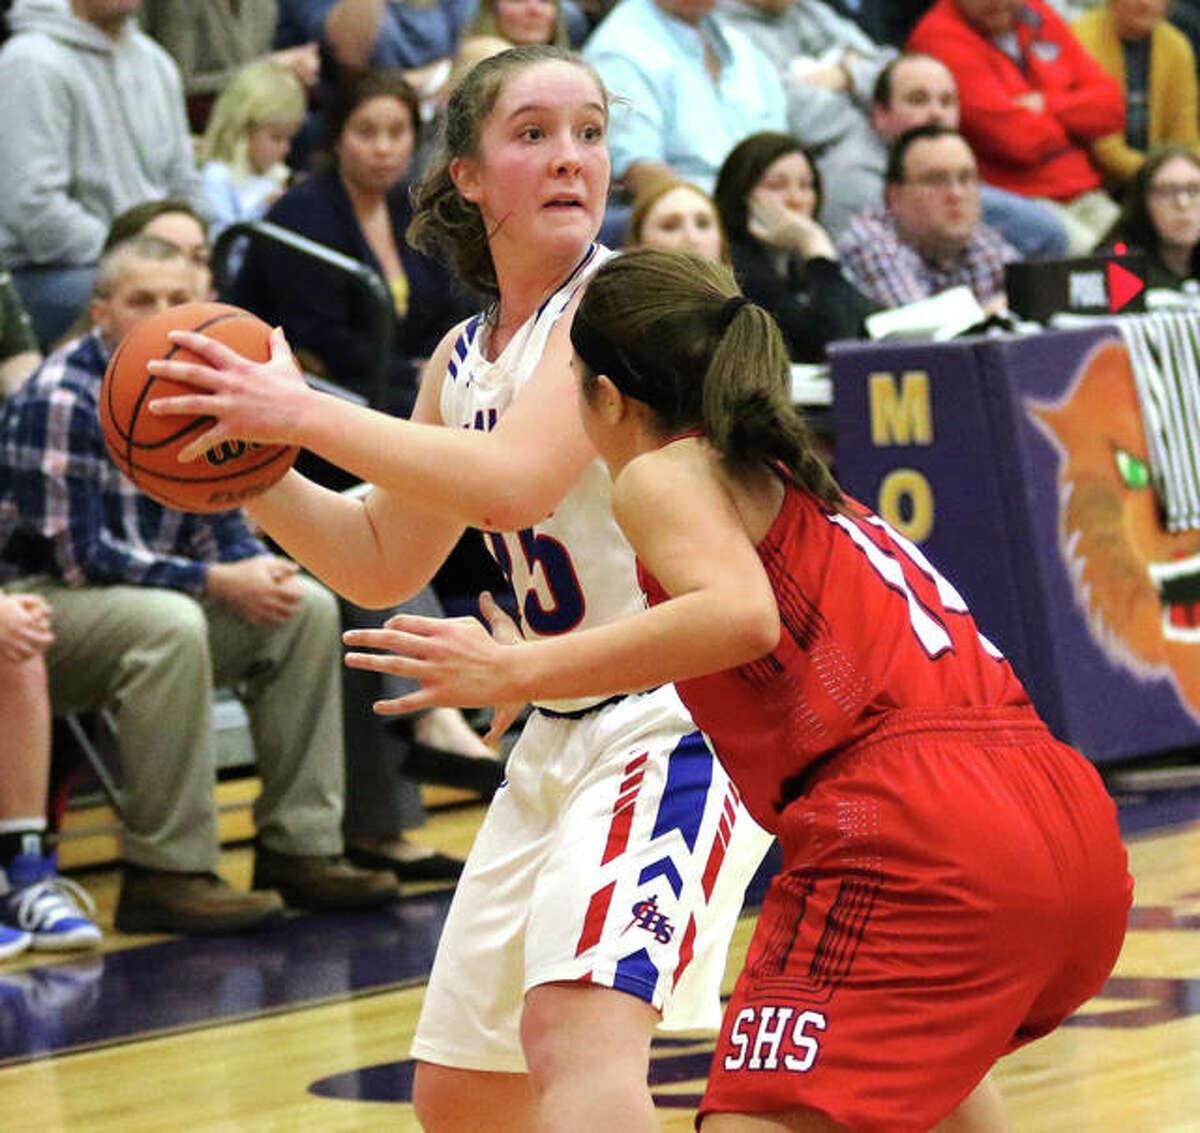 Carlinville’s Sarah DeNeve (left), shown looking for a teammate in a game against Staunton at Mount Olive last season, had 15 points and 10 rebounds Tuesday night in the Cavs’ win over Triad in Carlinville.